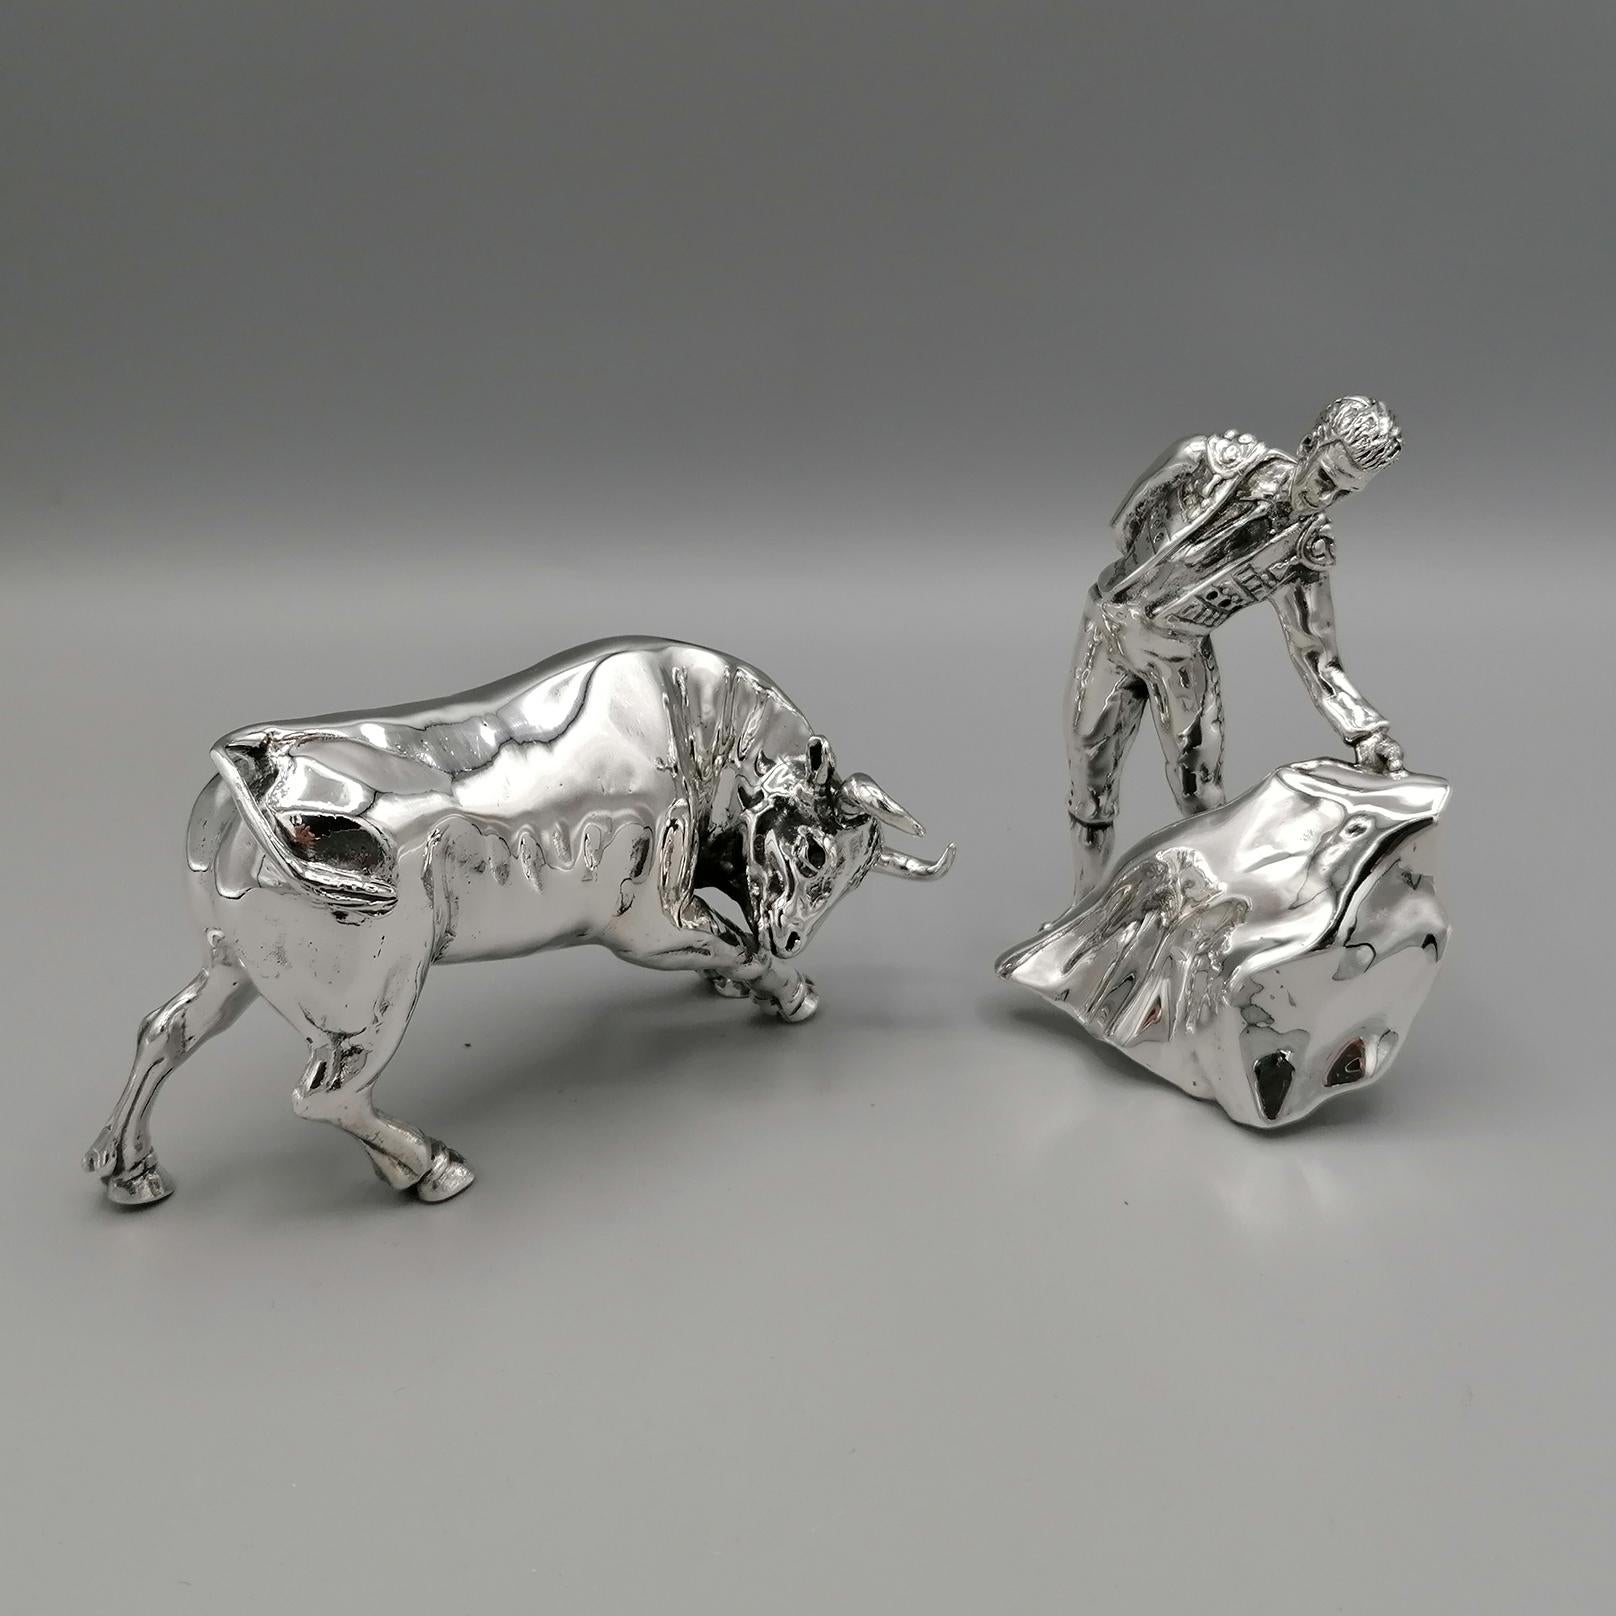 Solid sterling silver bull and bullfighter miniature.
Both the bull and the bullfighter were made with the casting technique and then chiseled to bring out the details.
The precision of the silversmiths who made the sculpture give the figures the